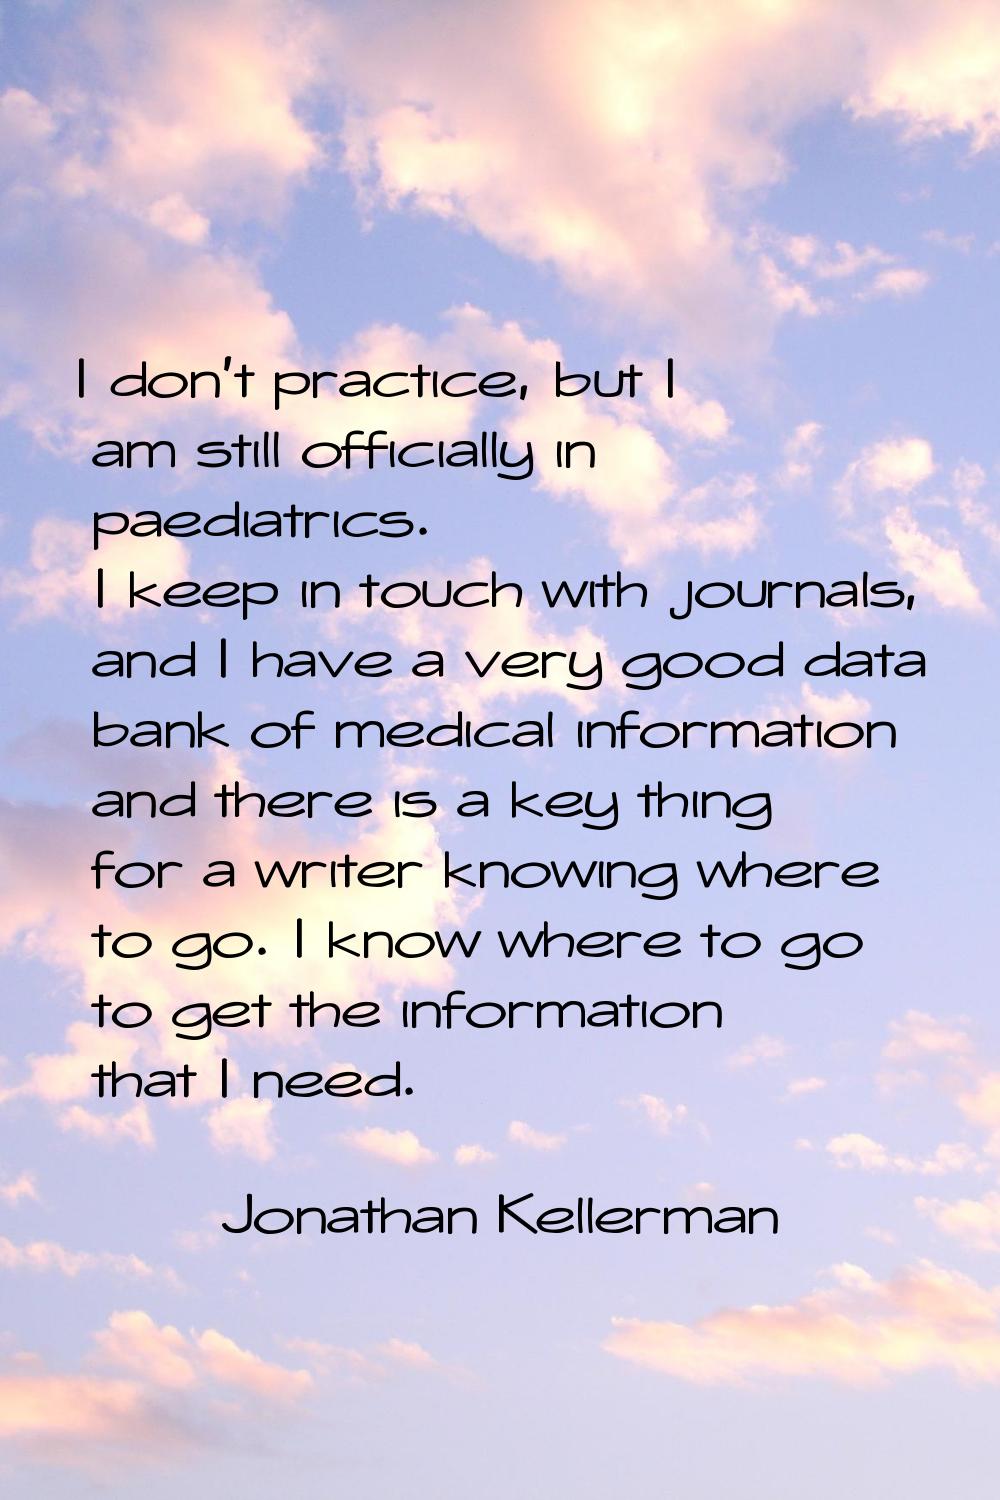 I don't practice, but I am still officially in paediatrics. I keep in touch with journals, and I ha